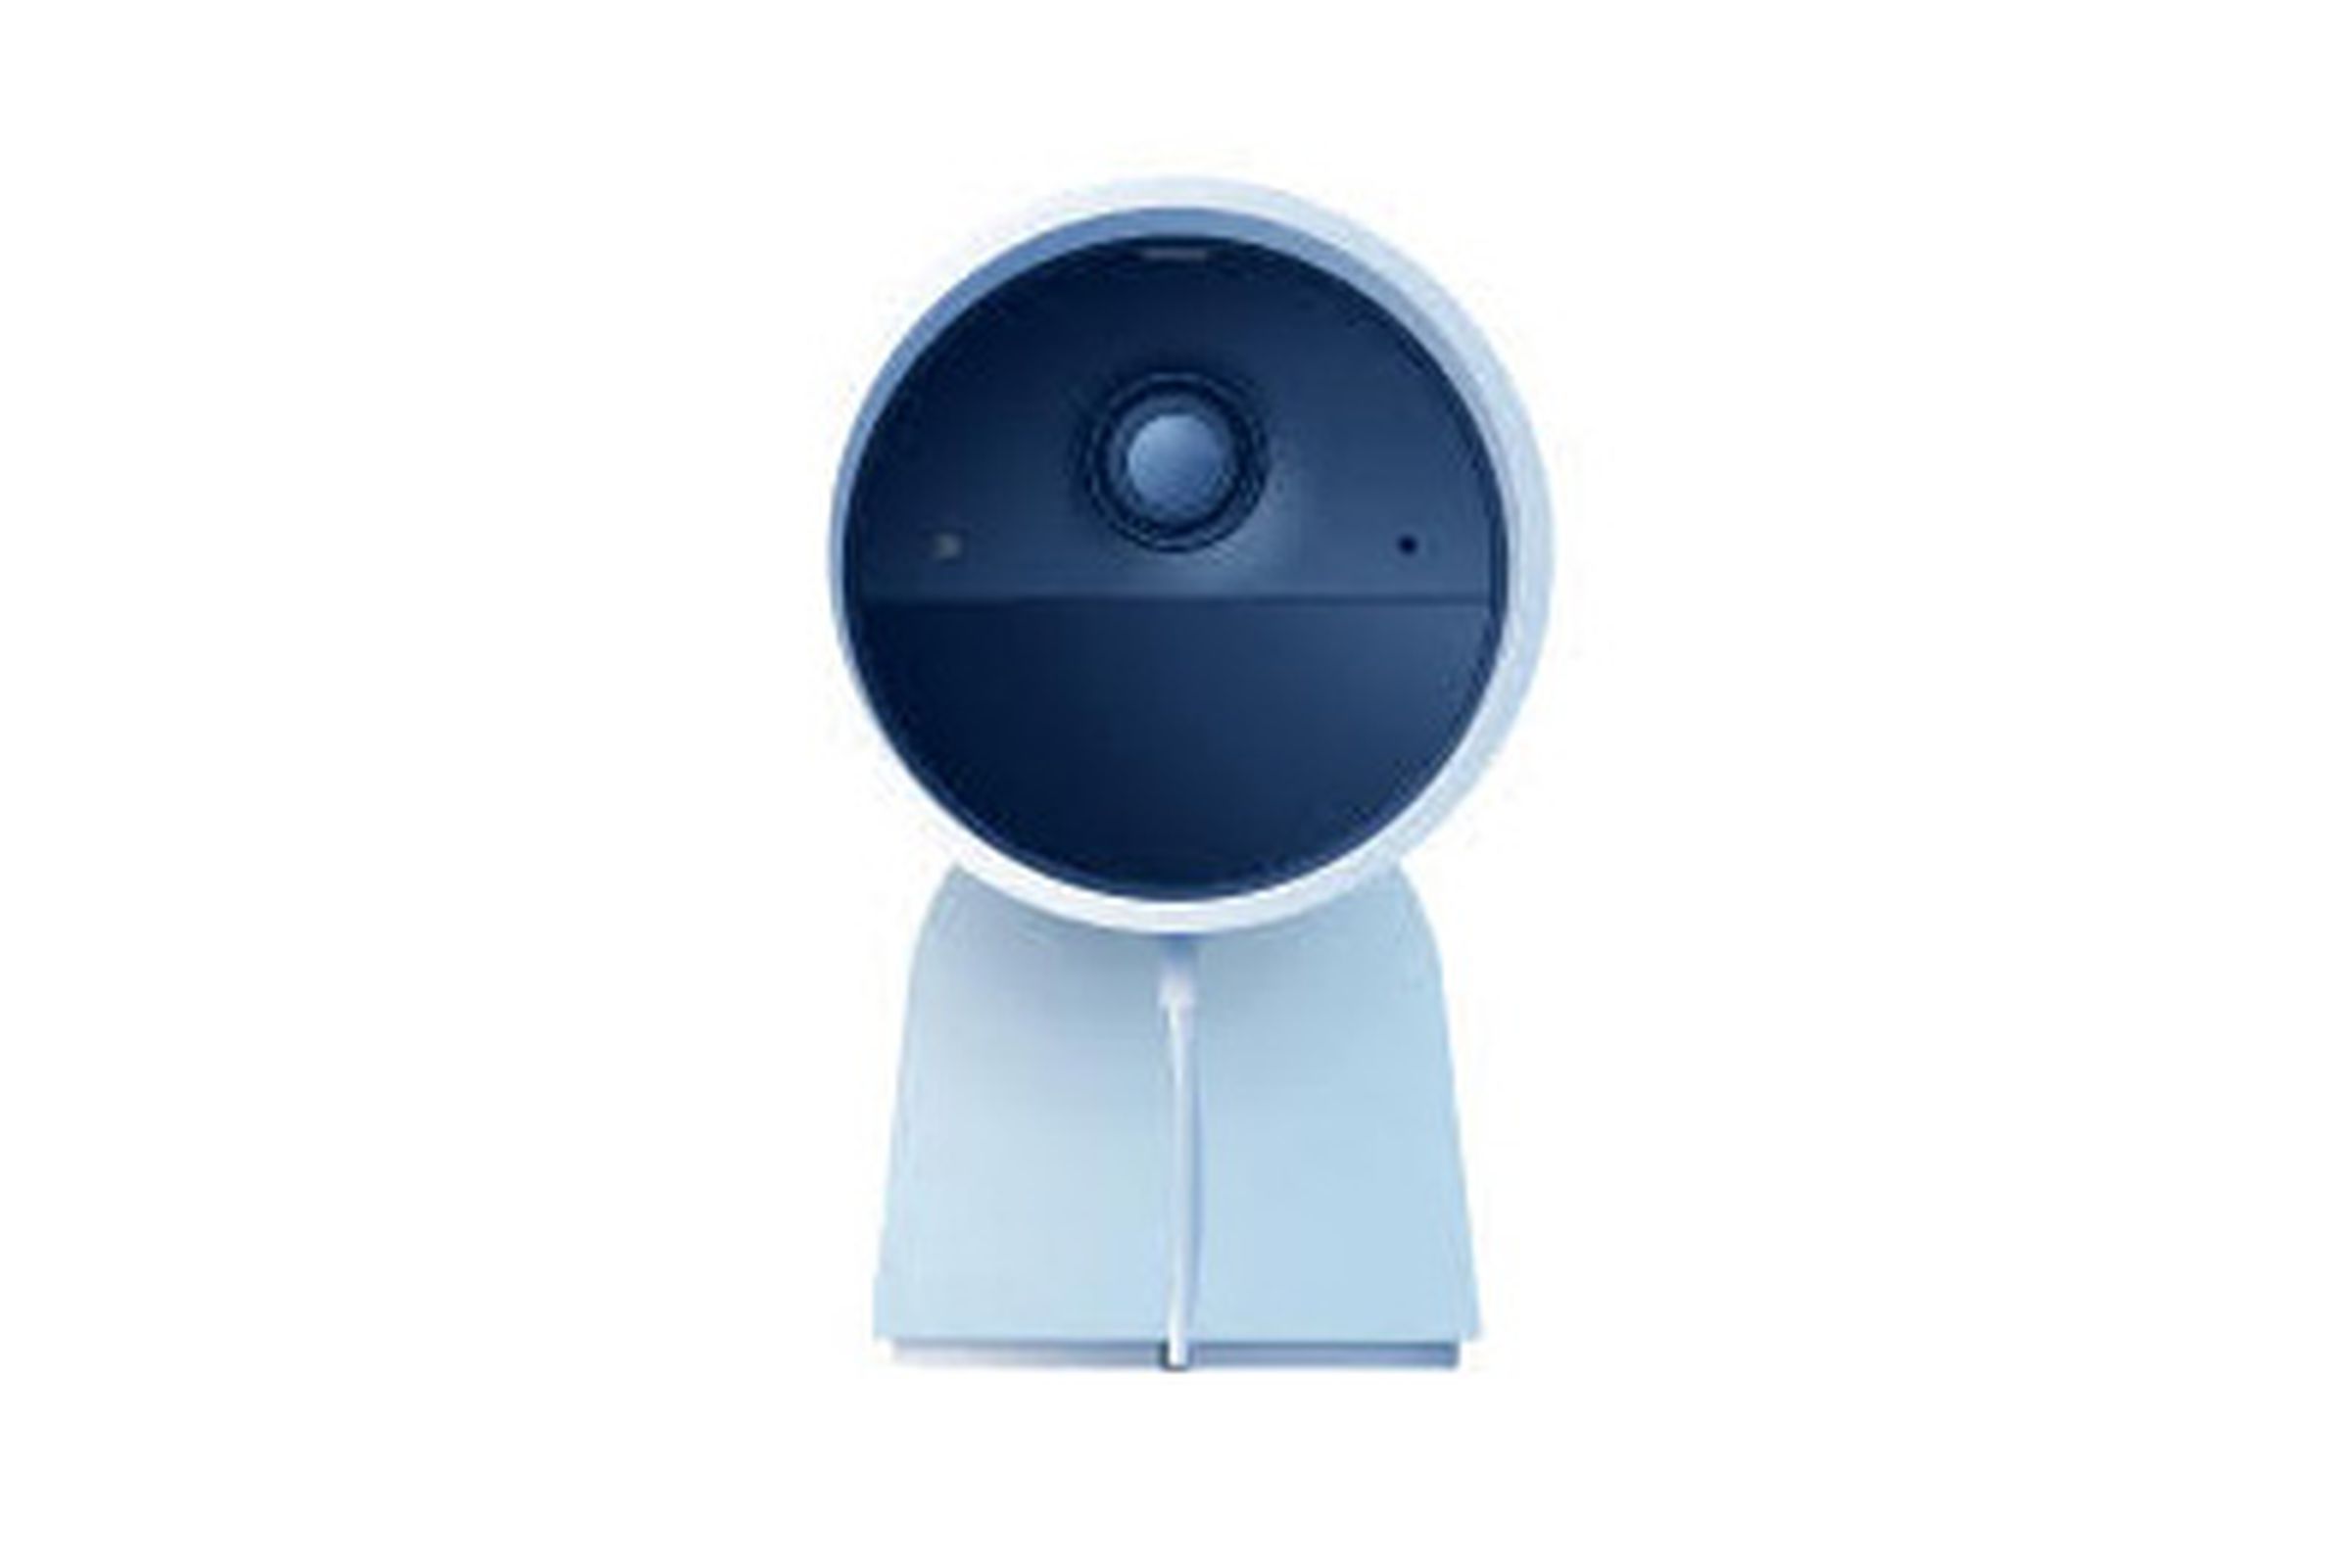 Philips hue camera render from the front on.